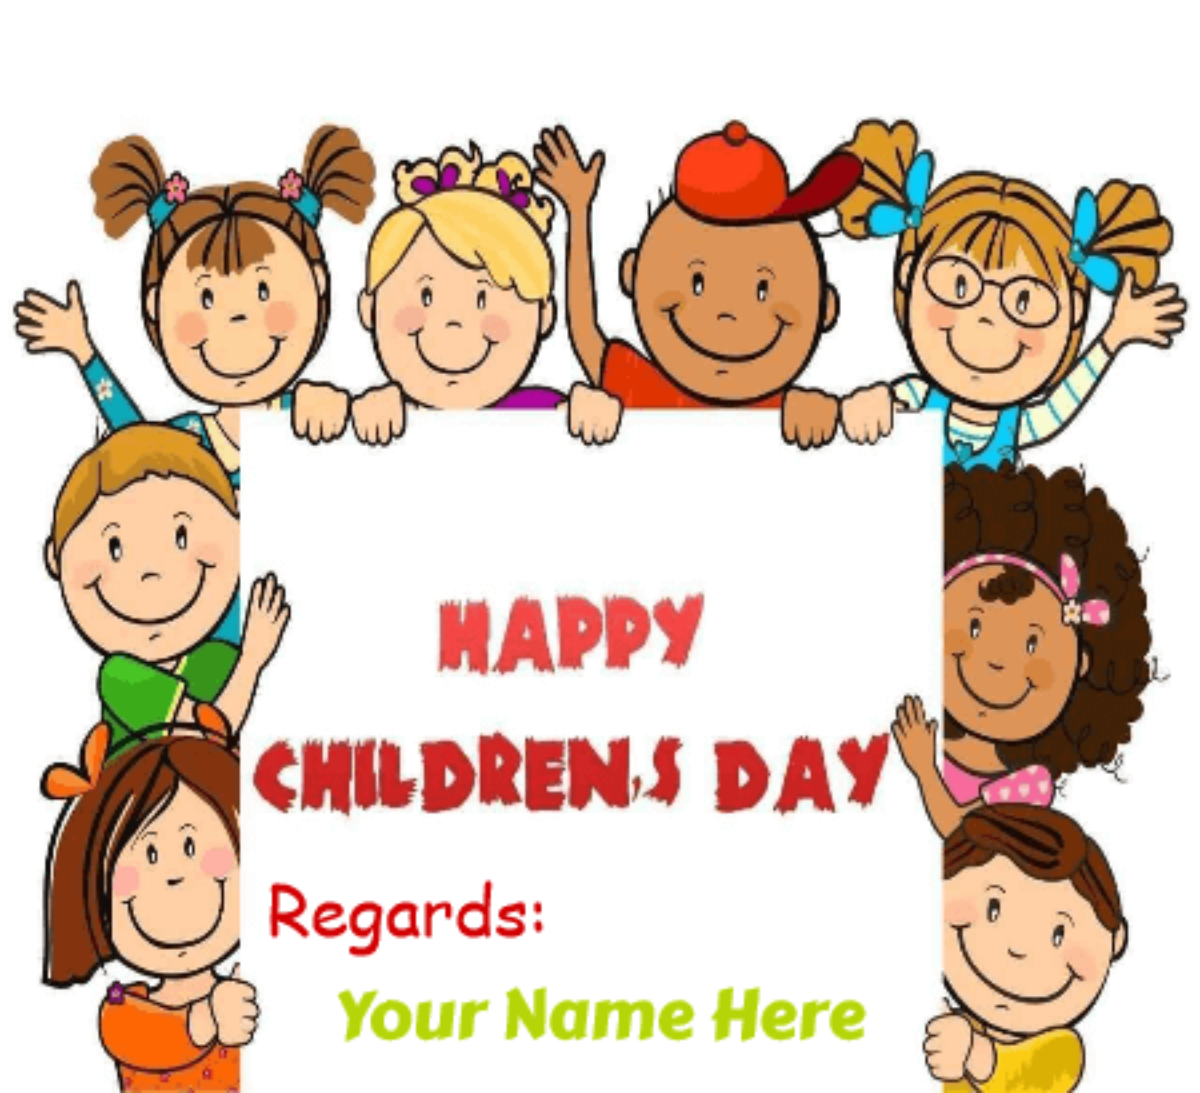 Happy Children's Day Quotes From Teachers - Write Your Name on Wish